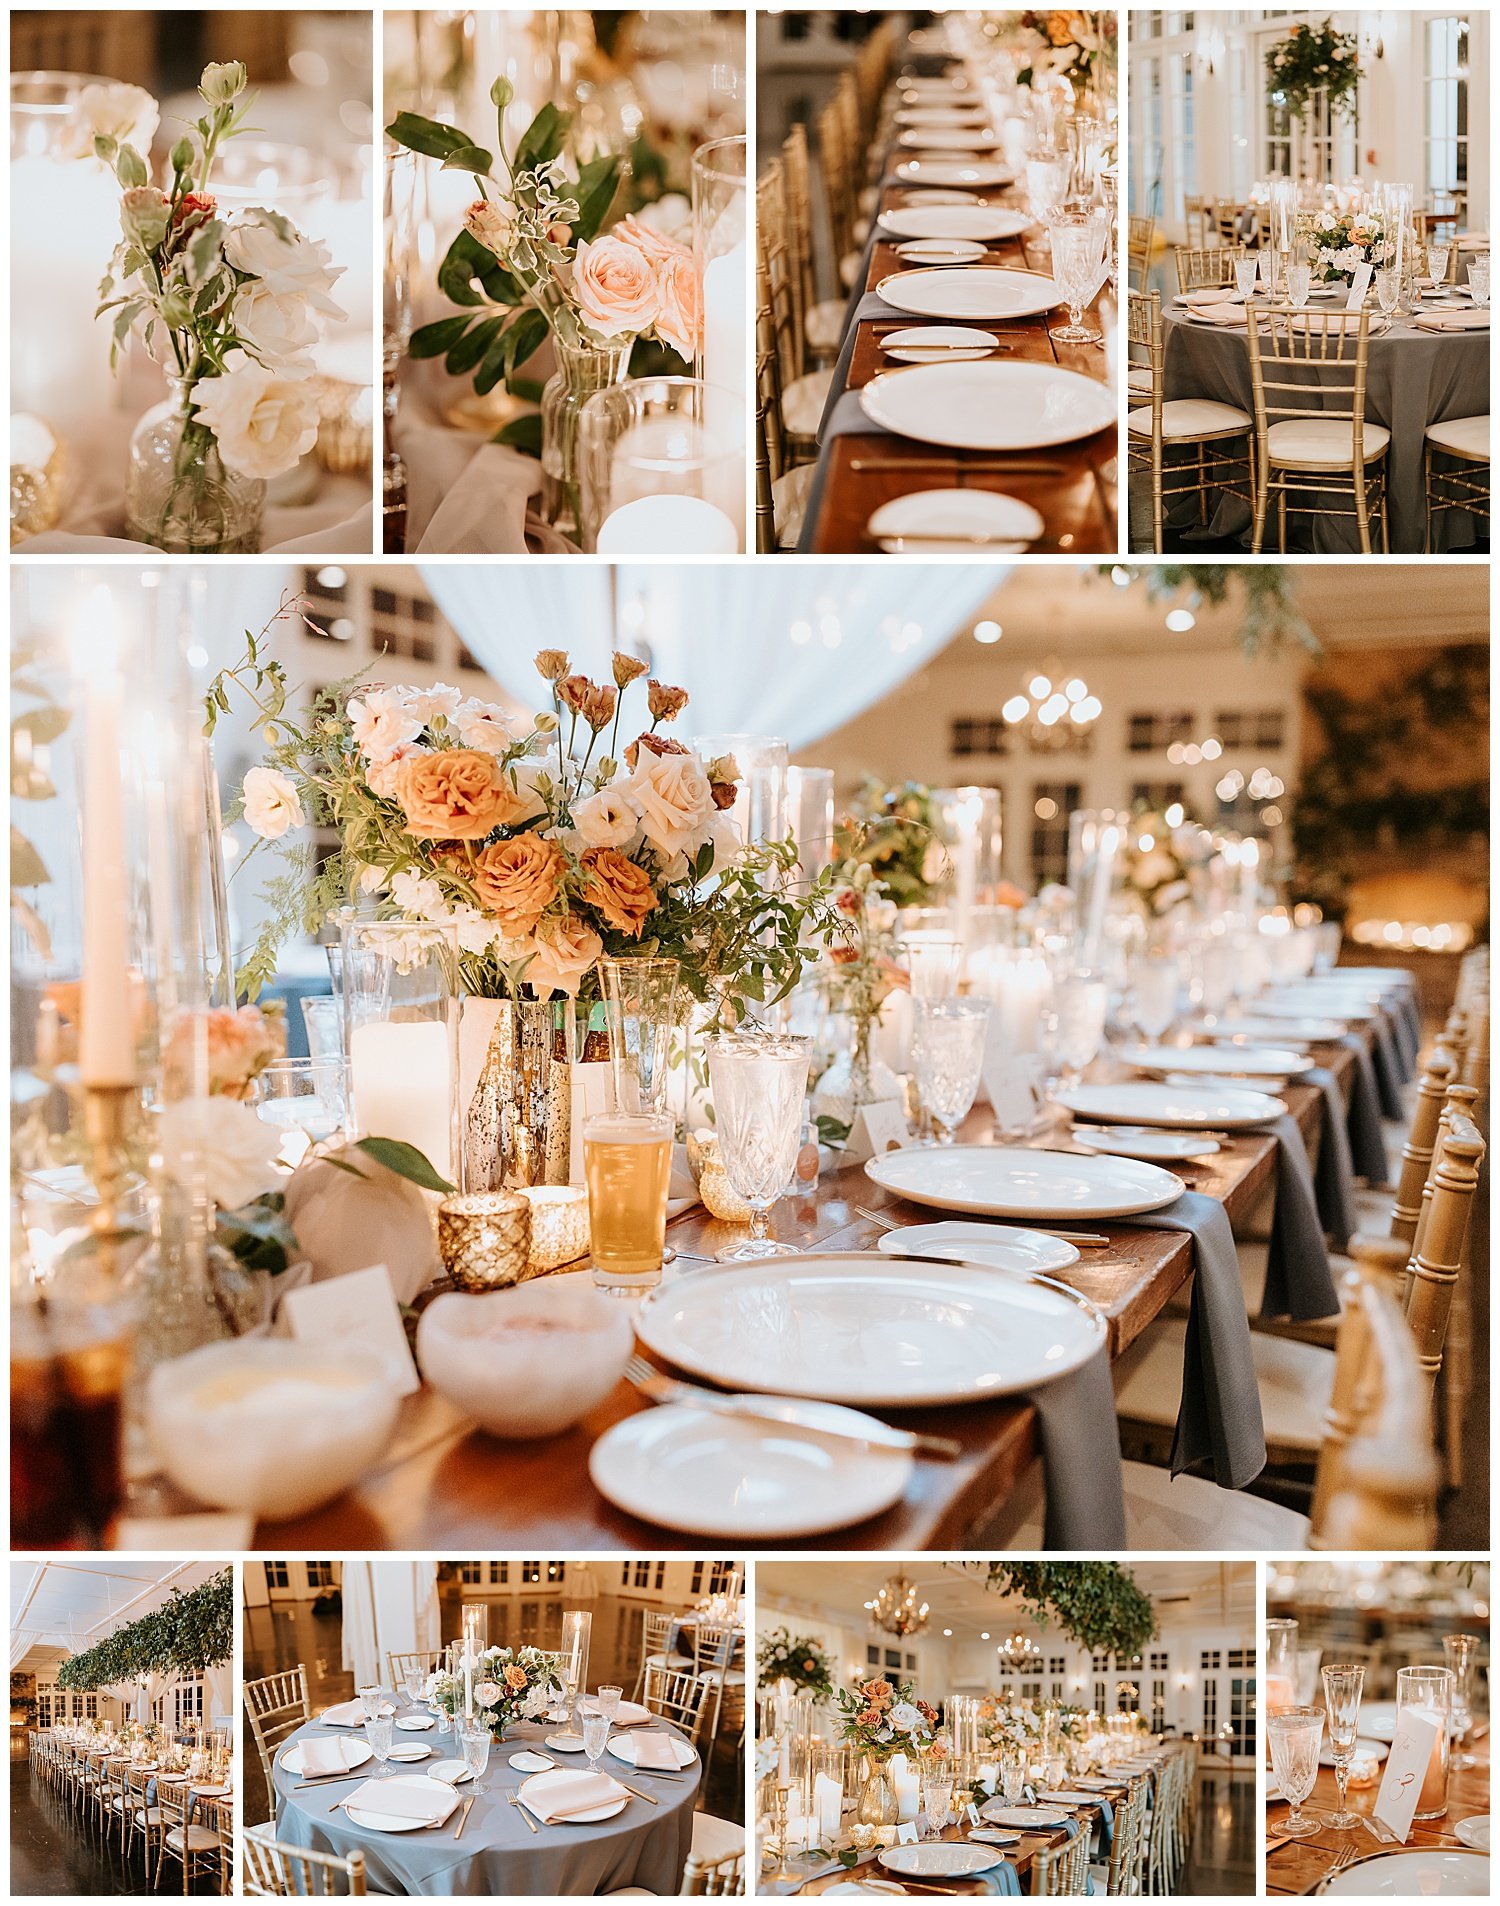 wedding reception details decor photos of plates and tablescape